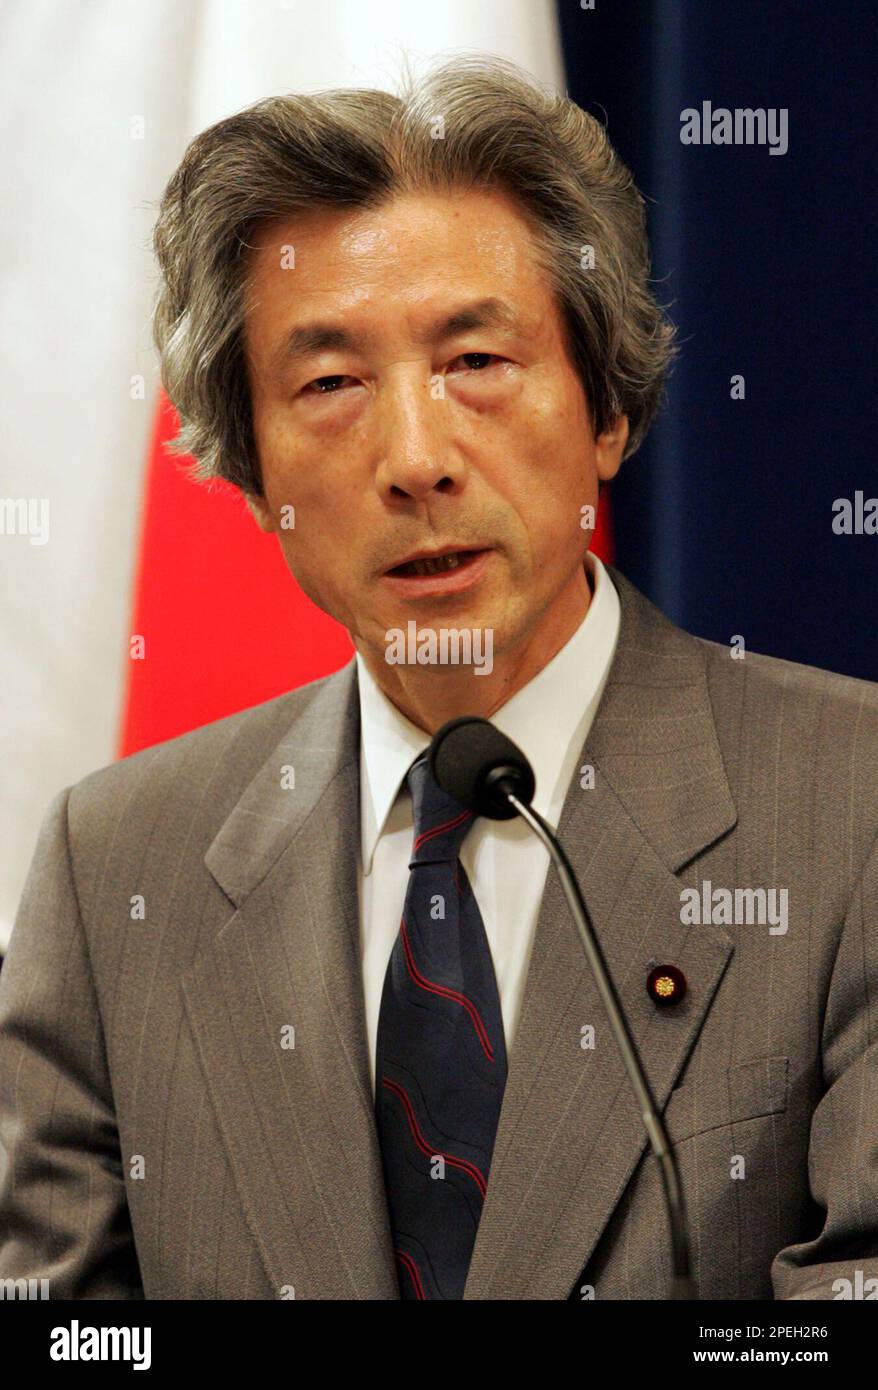 Japanese Prime Minister Junichiro Koizumi speaks during a press conference at his official residence in Tokyo Thursday, Dec. 9, 2004 after Japan's Cabinet voted to keep Japanese troops in Iraq for another year, extending the country's largest overseas military operation since the end of World War II. "We must not give in to terror," Koizmi said in the nationally televised address. "The Iraqis are trying to build a government with their own hands. We must support this. The Self-Defense Forces are needed for this end." (AP Photo/Shizuo Kambayashi) Stock Photo